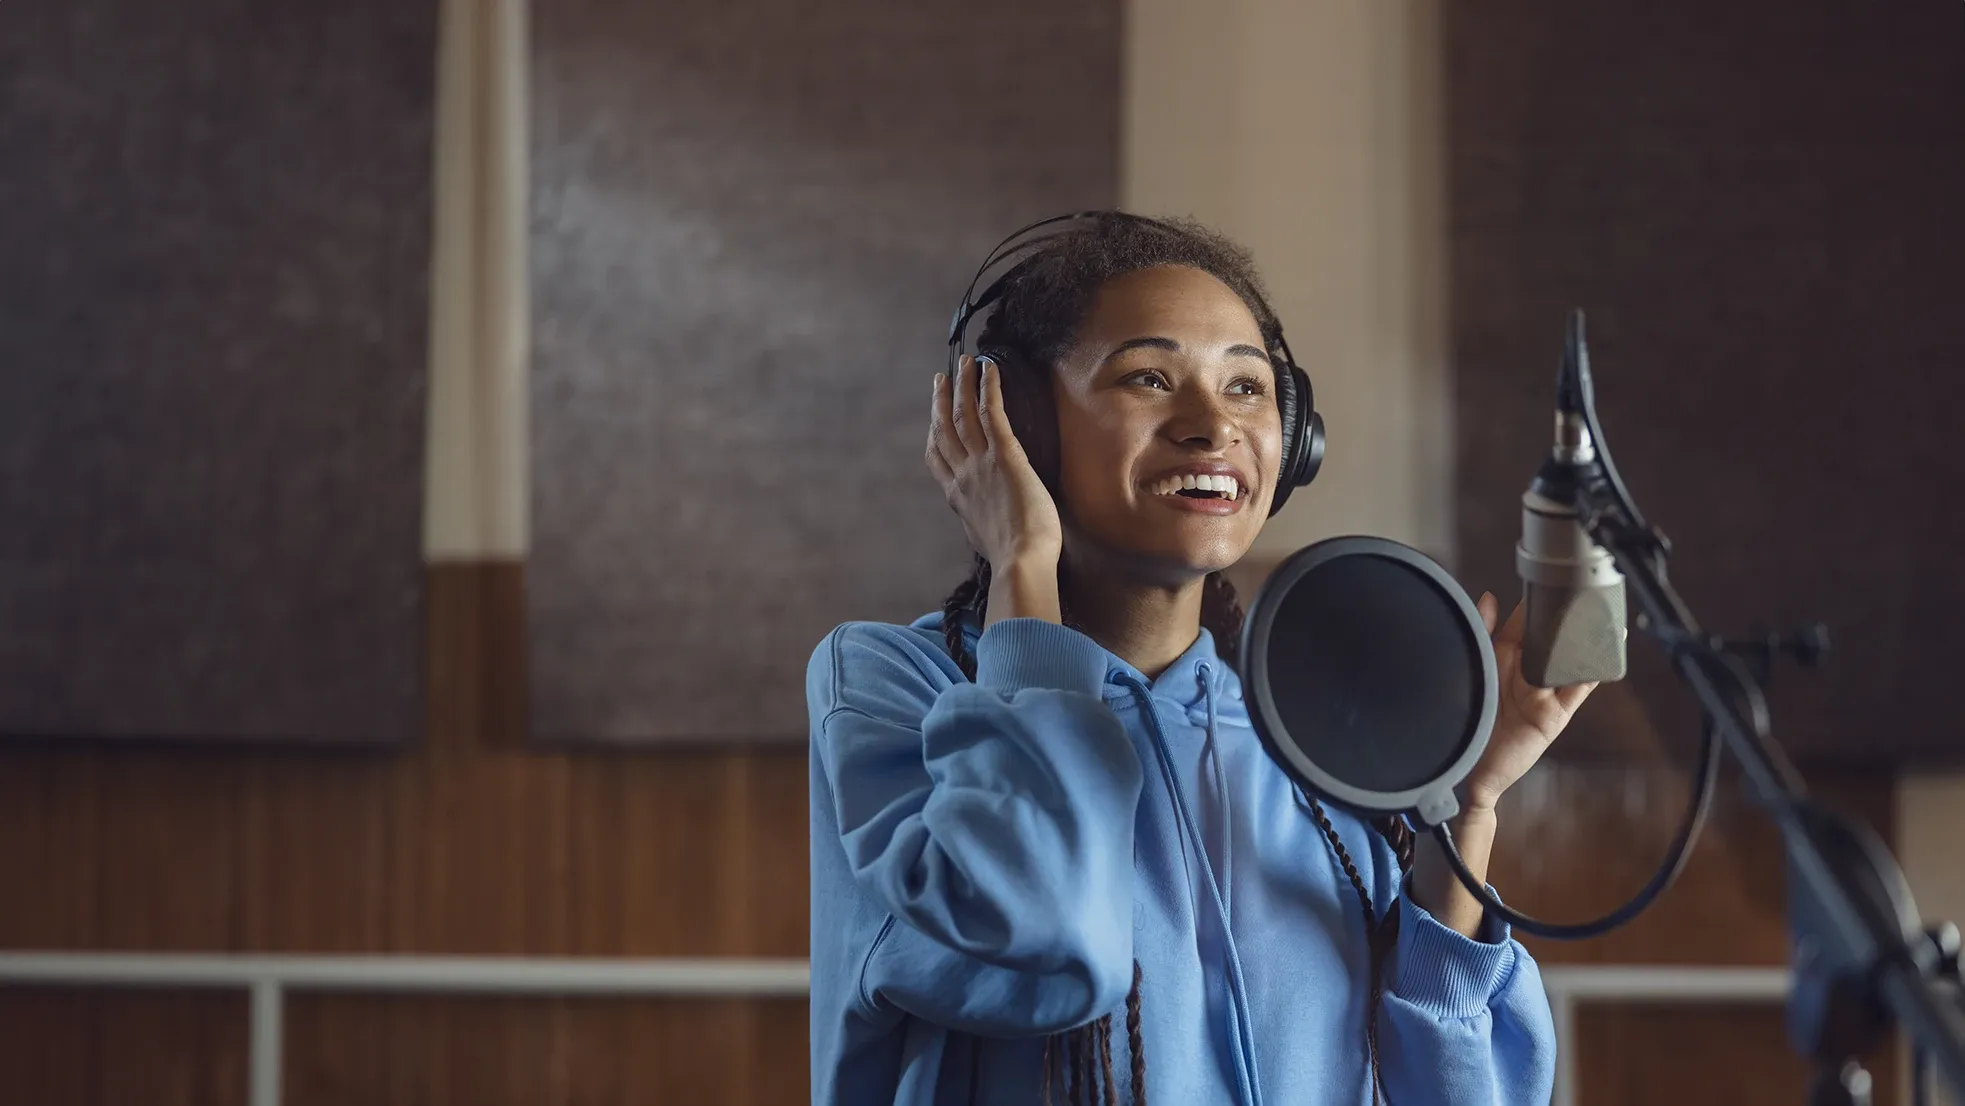 Woman recording her voice in a professional recording studio setting